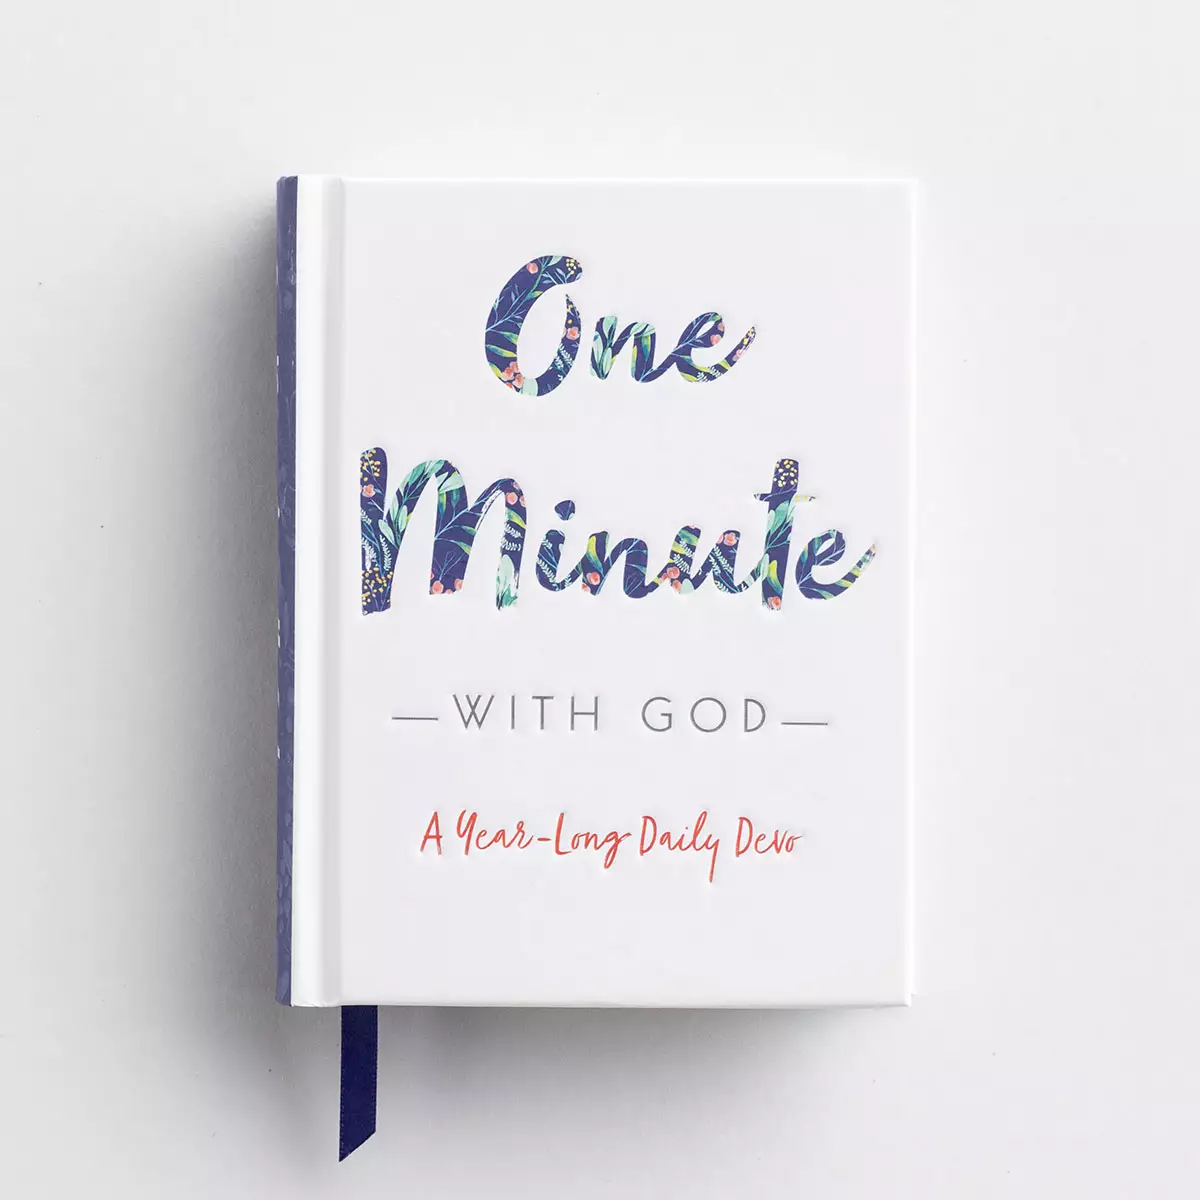 One Minute with God - Devotional Gift Book